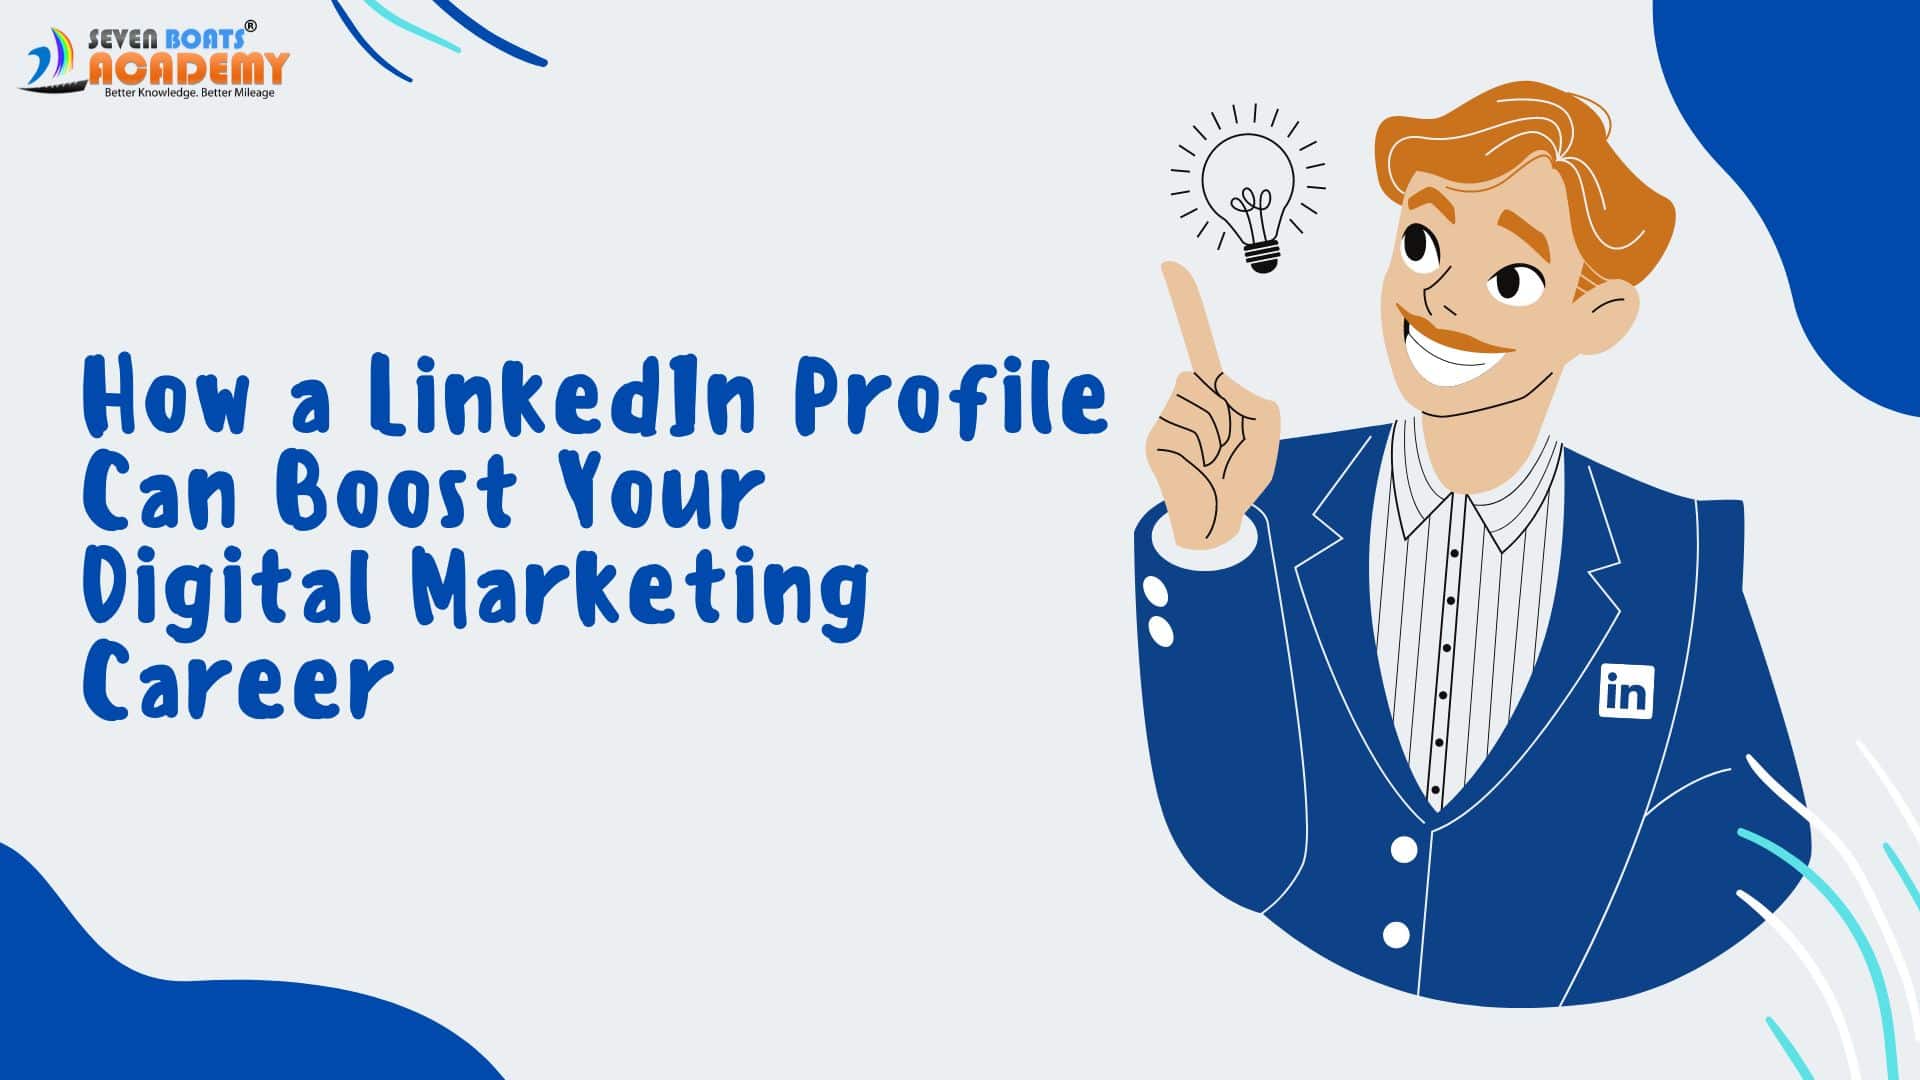 How a LinkedIn Profile Can Boost Your Digital Marketing Career